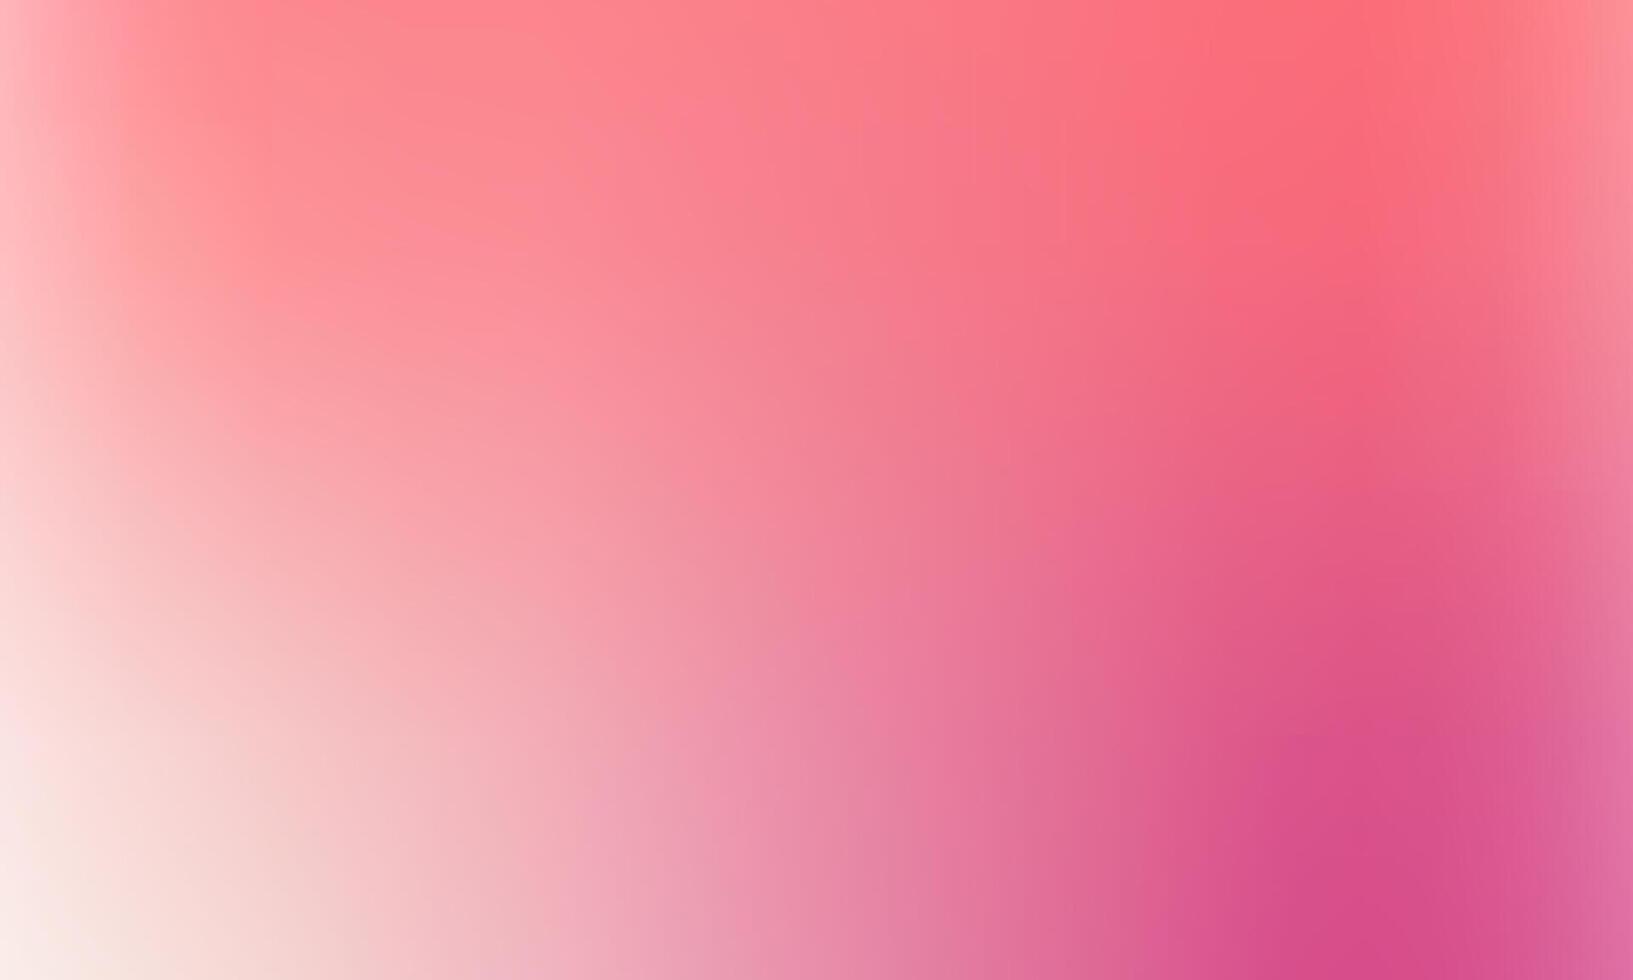 Colorful Blurred Pink Gradient Background Template vector